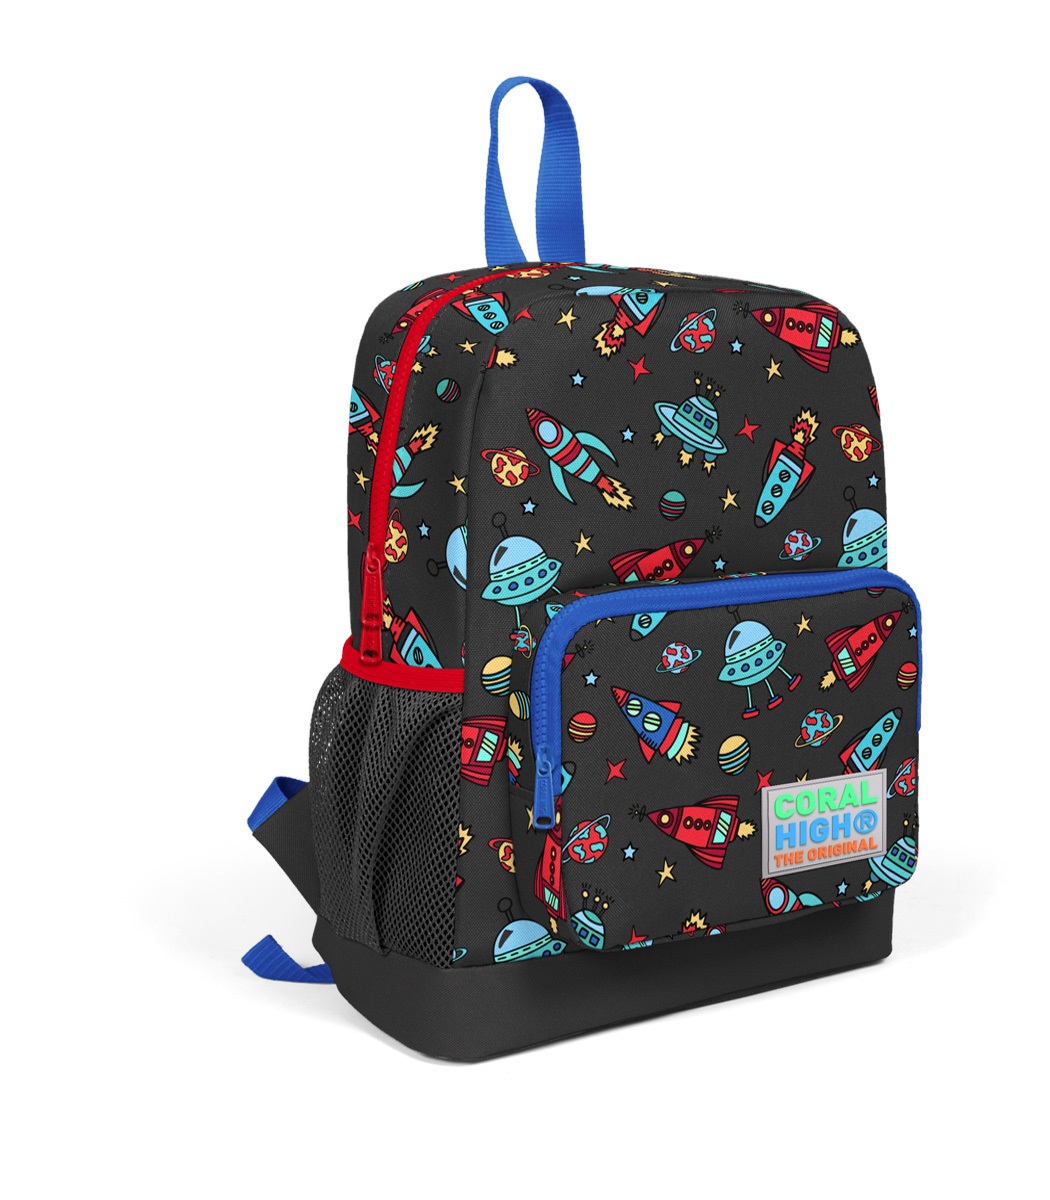 Coral High Kids Two Compartment Backpack - Dark Gray Red Space Pattern